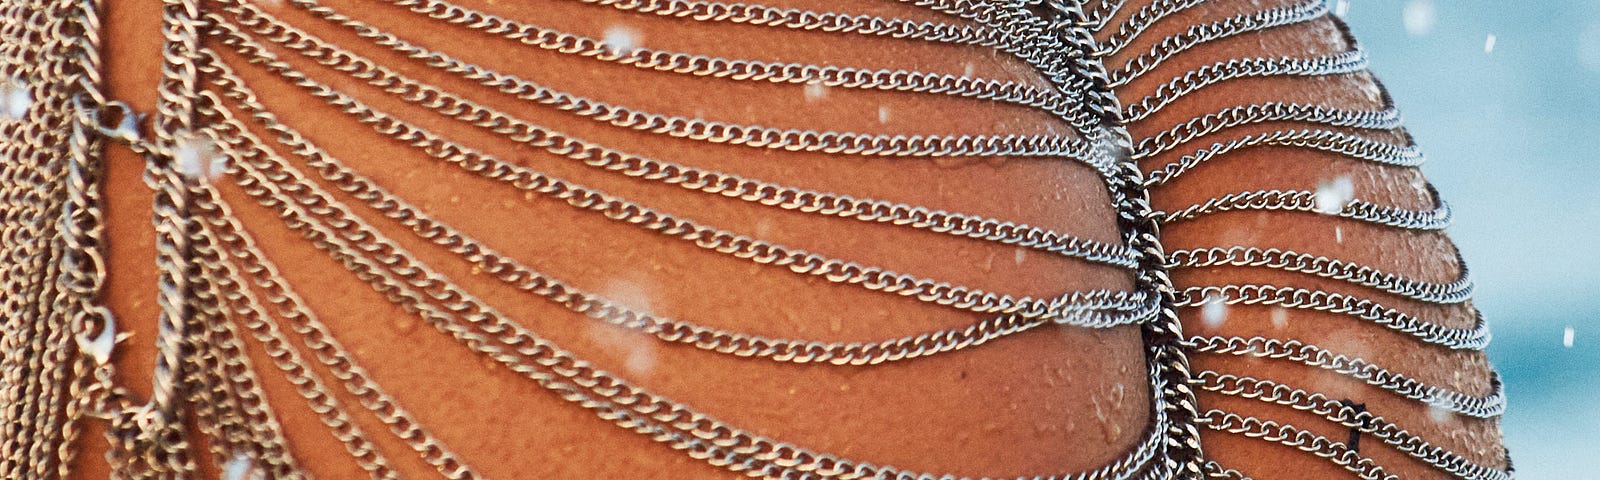 Beautiful chain maille-like jewelry worn on a woman’s butt. Lots of loopy chains over flash.